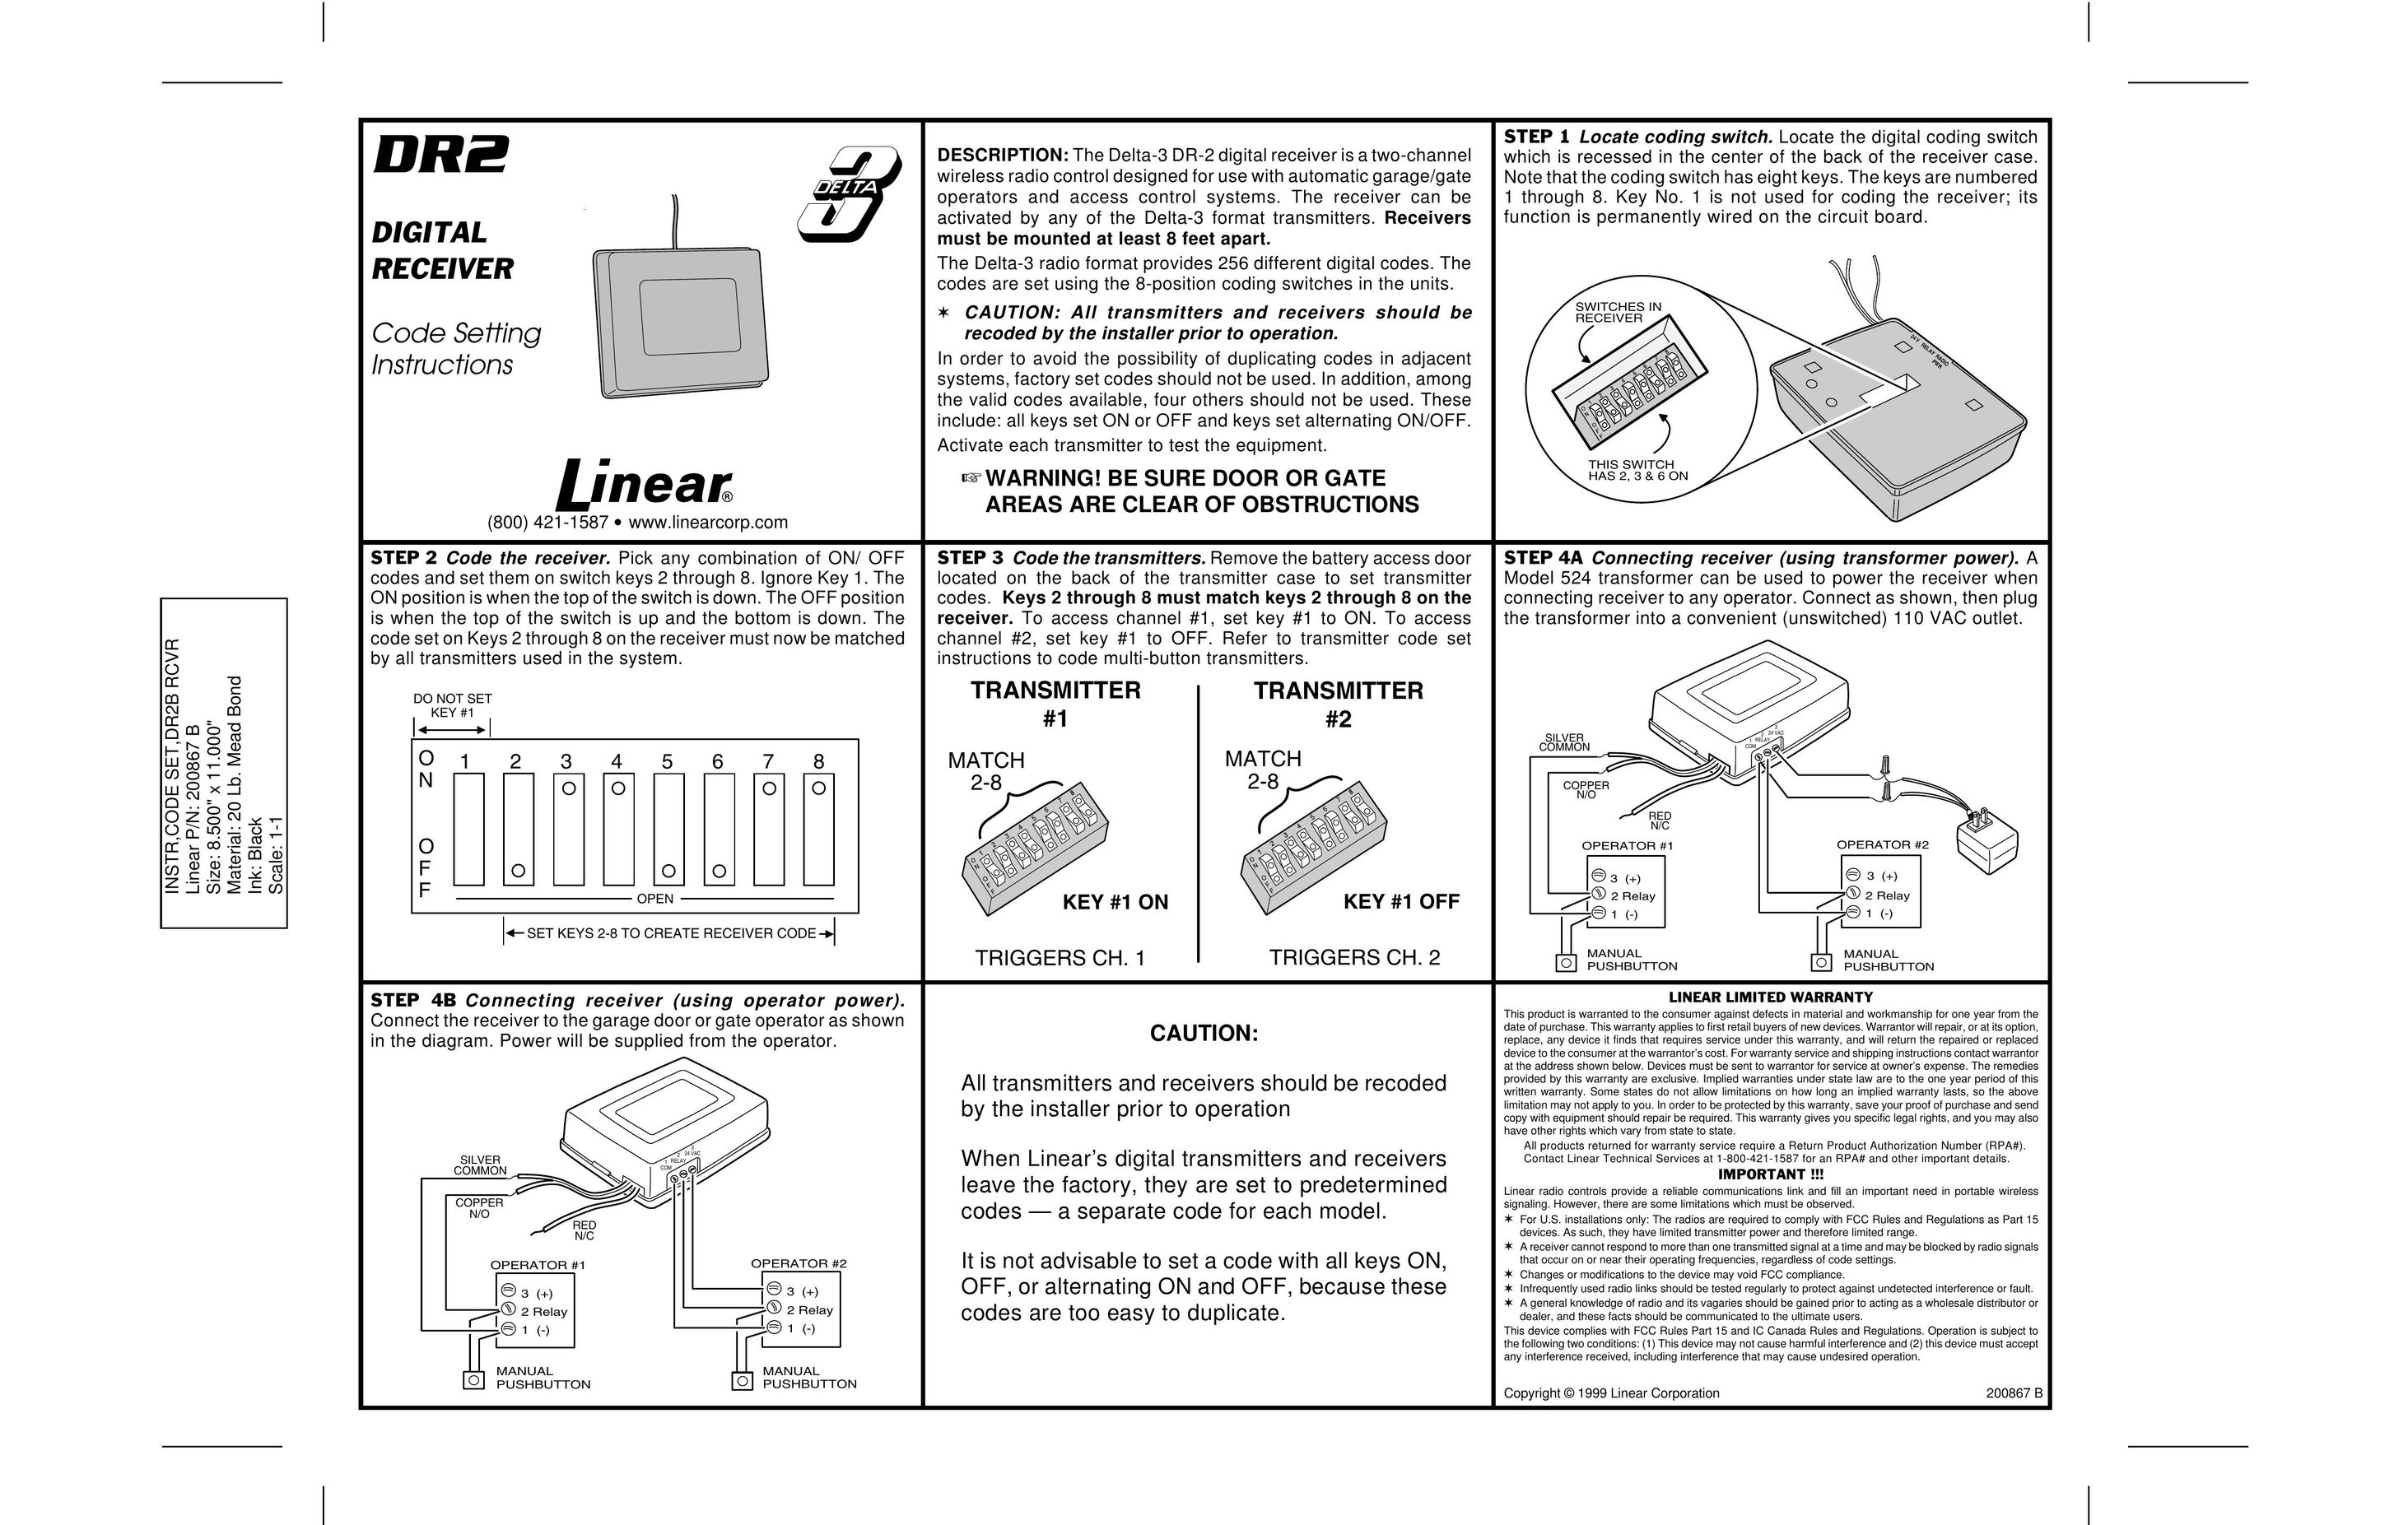 Linear DR2 CRT Television User Manual